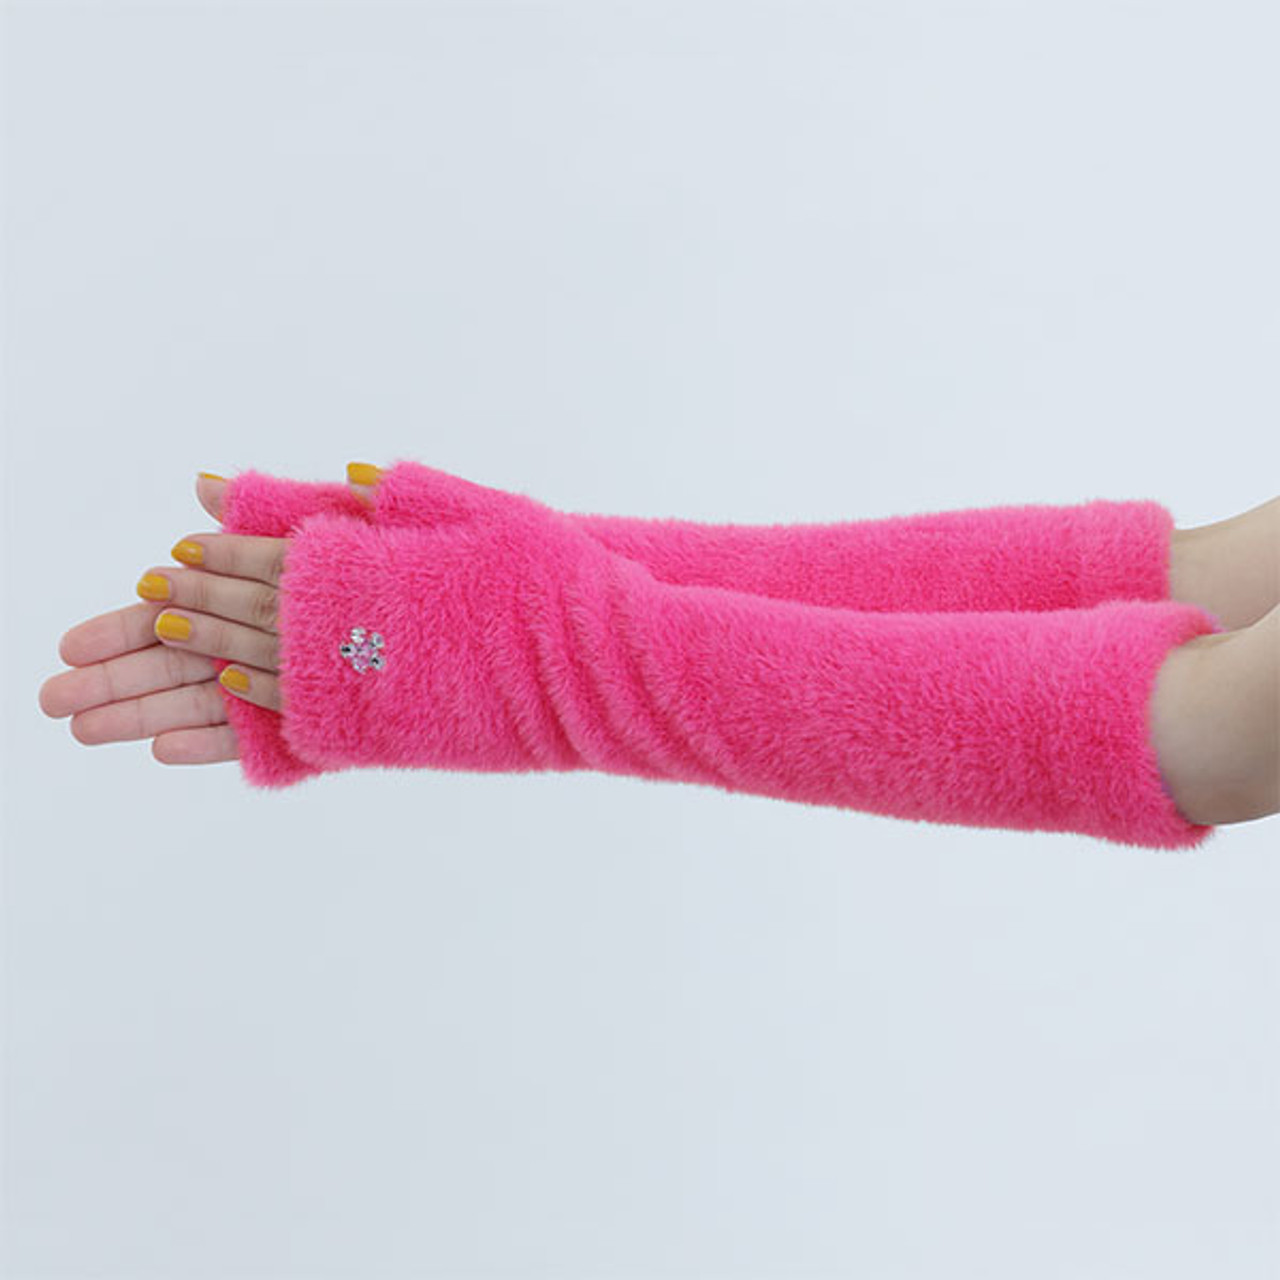 Shaggy Knitted Arm Warmers